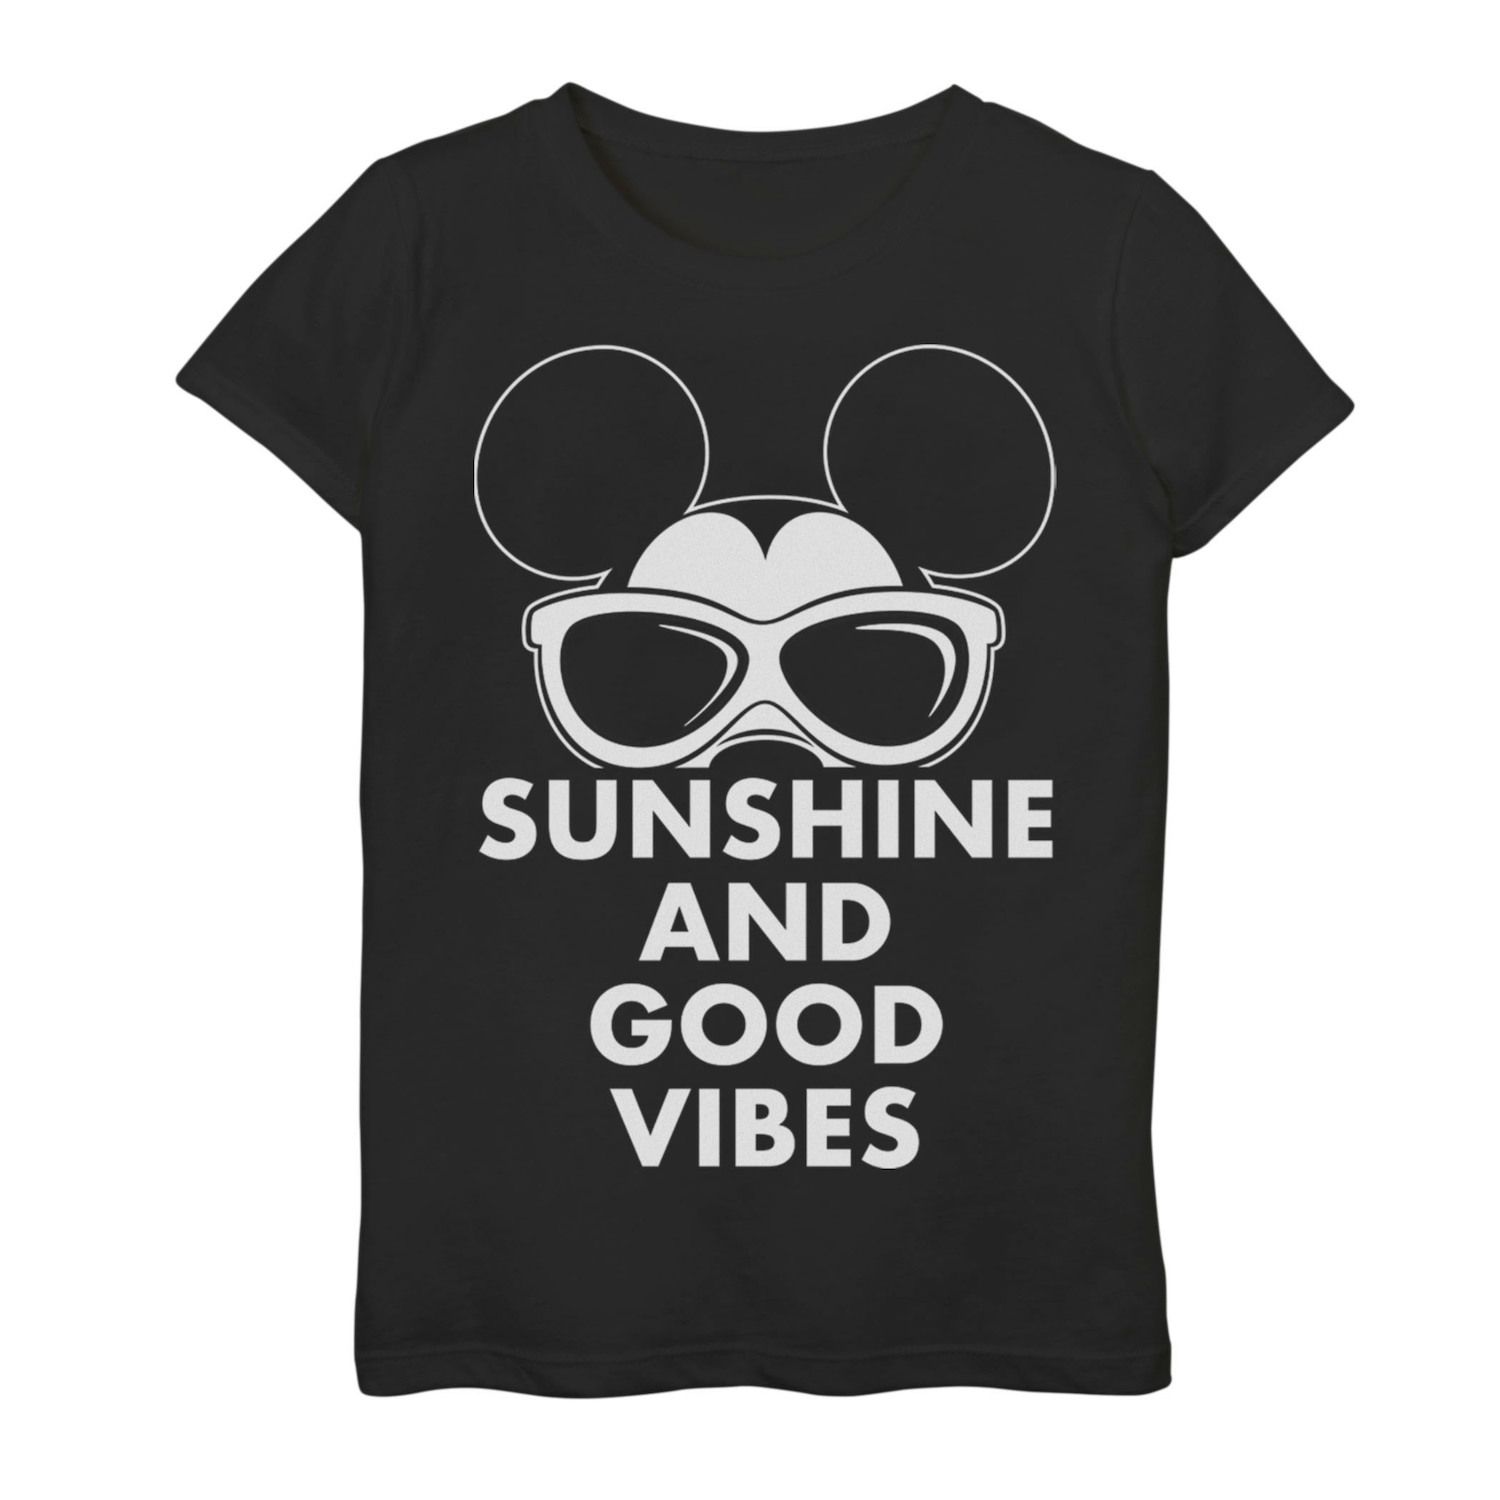 Image for Disney s Mickey Mouse & Friends Girls 7-16 Mickey Sunshine And Good Feelings Graphic Tee at Kohl's.